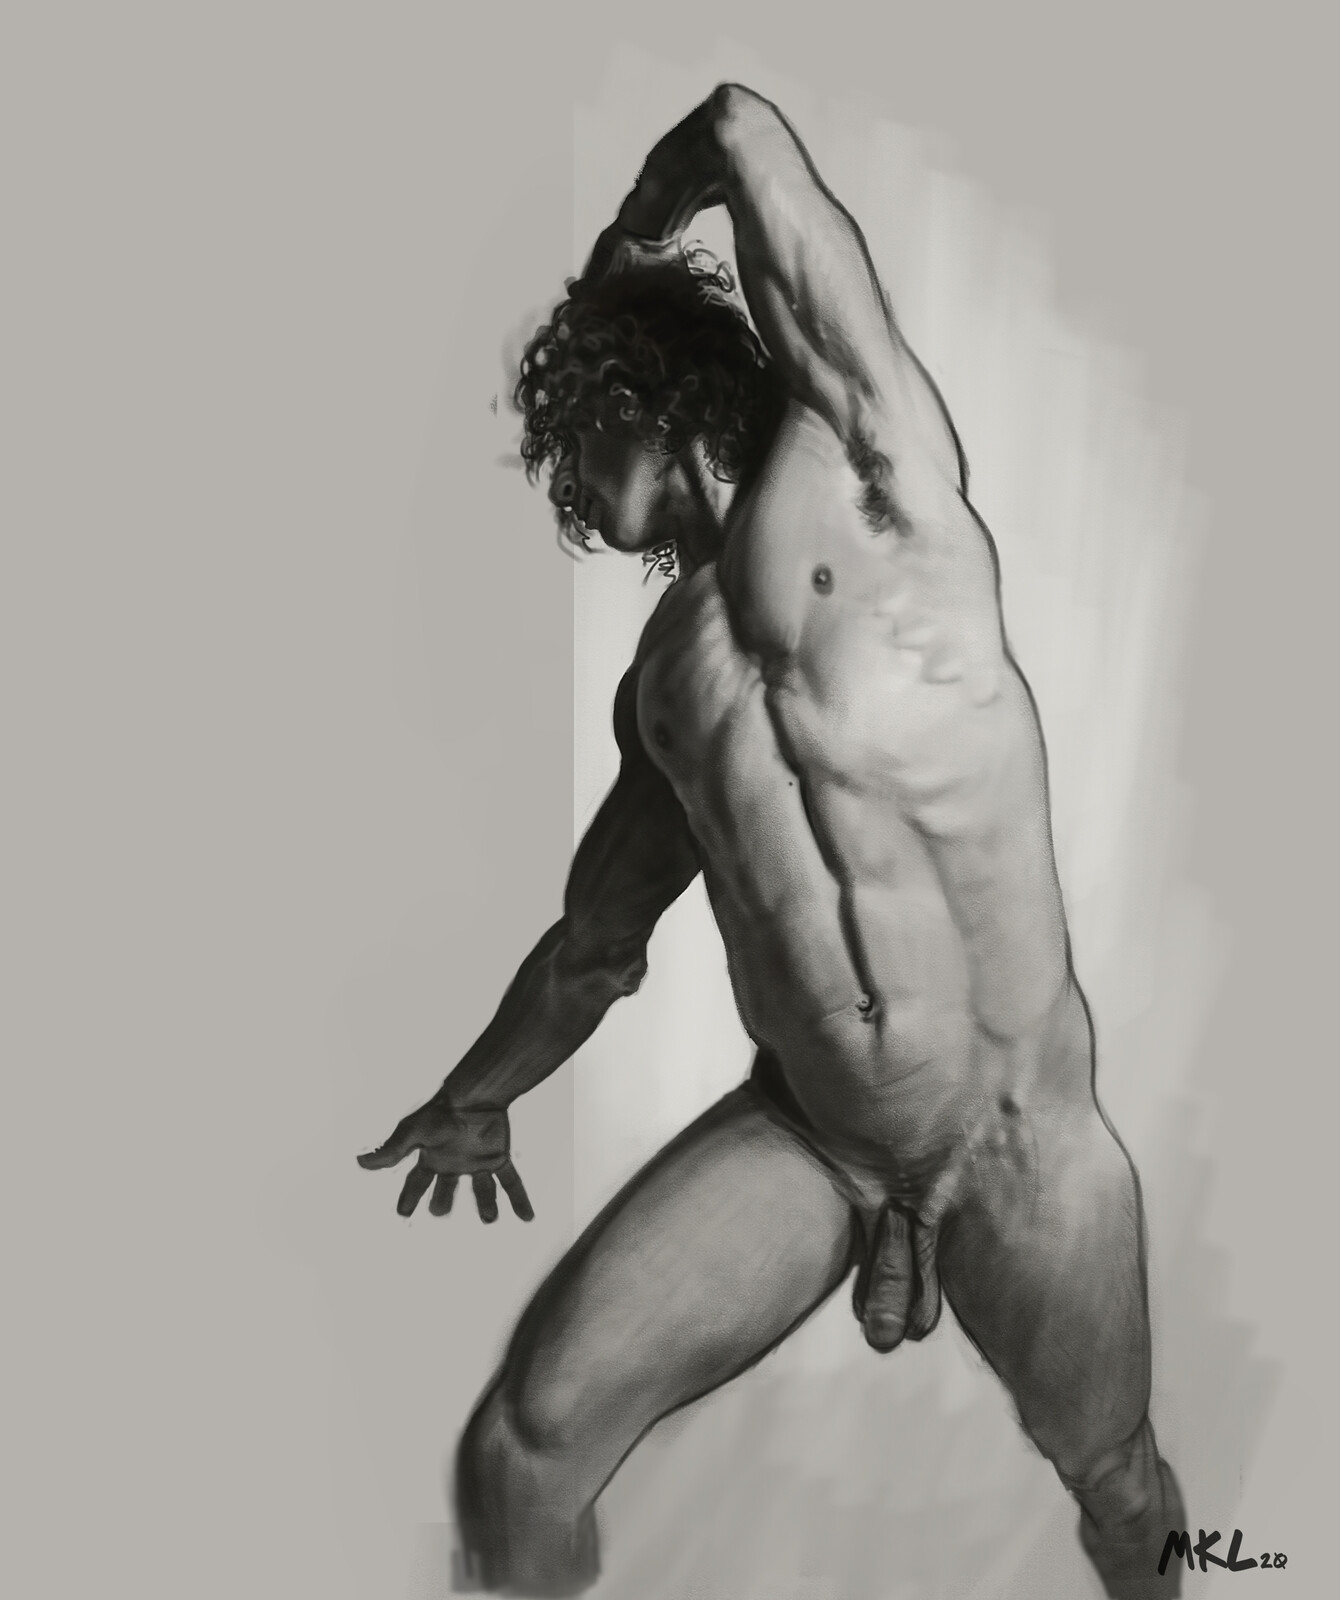 Another Male nude study